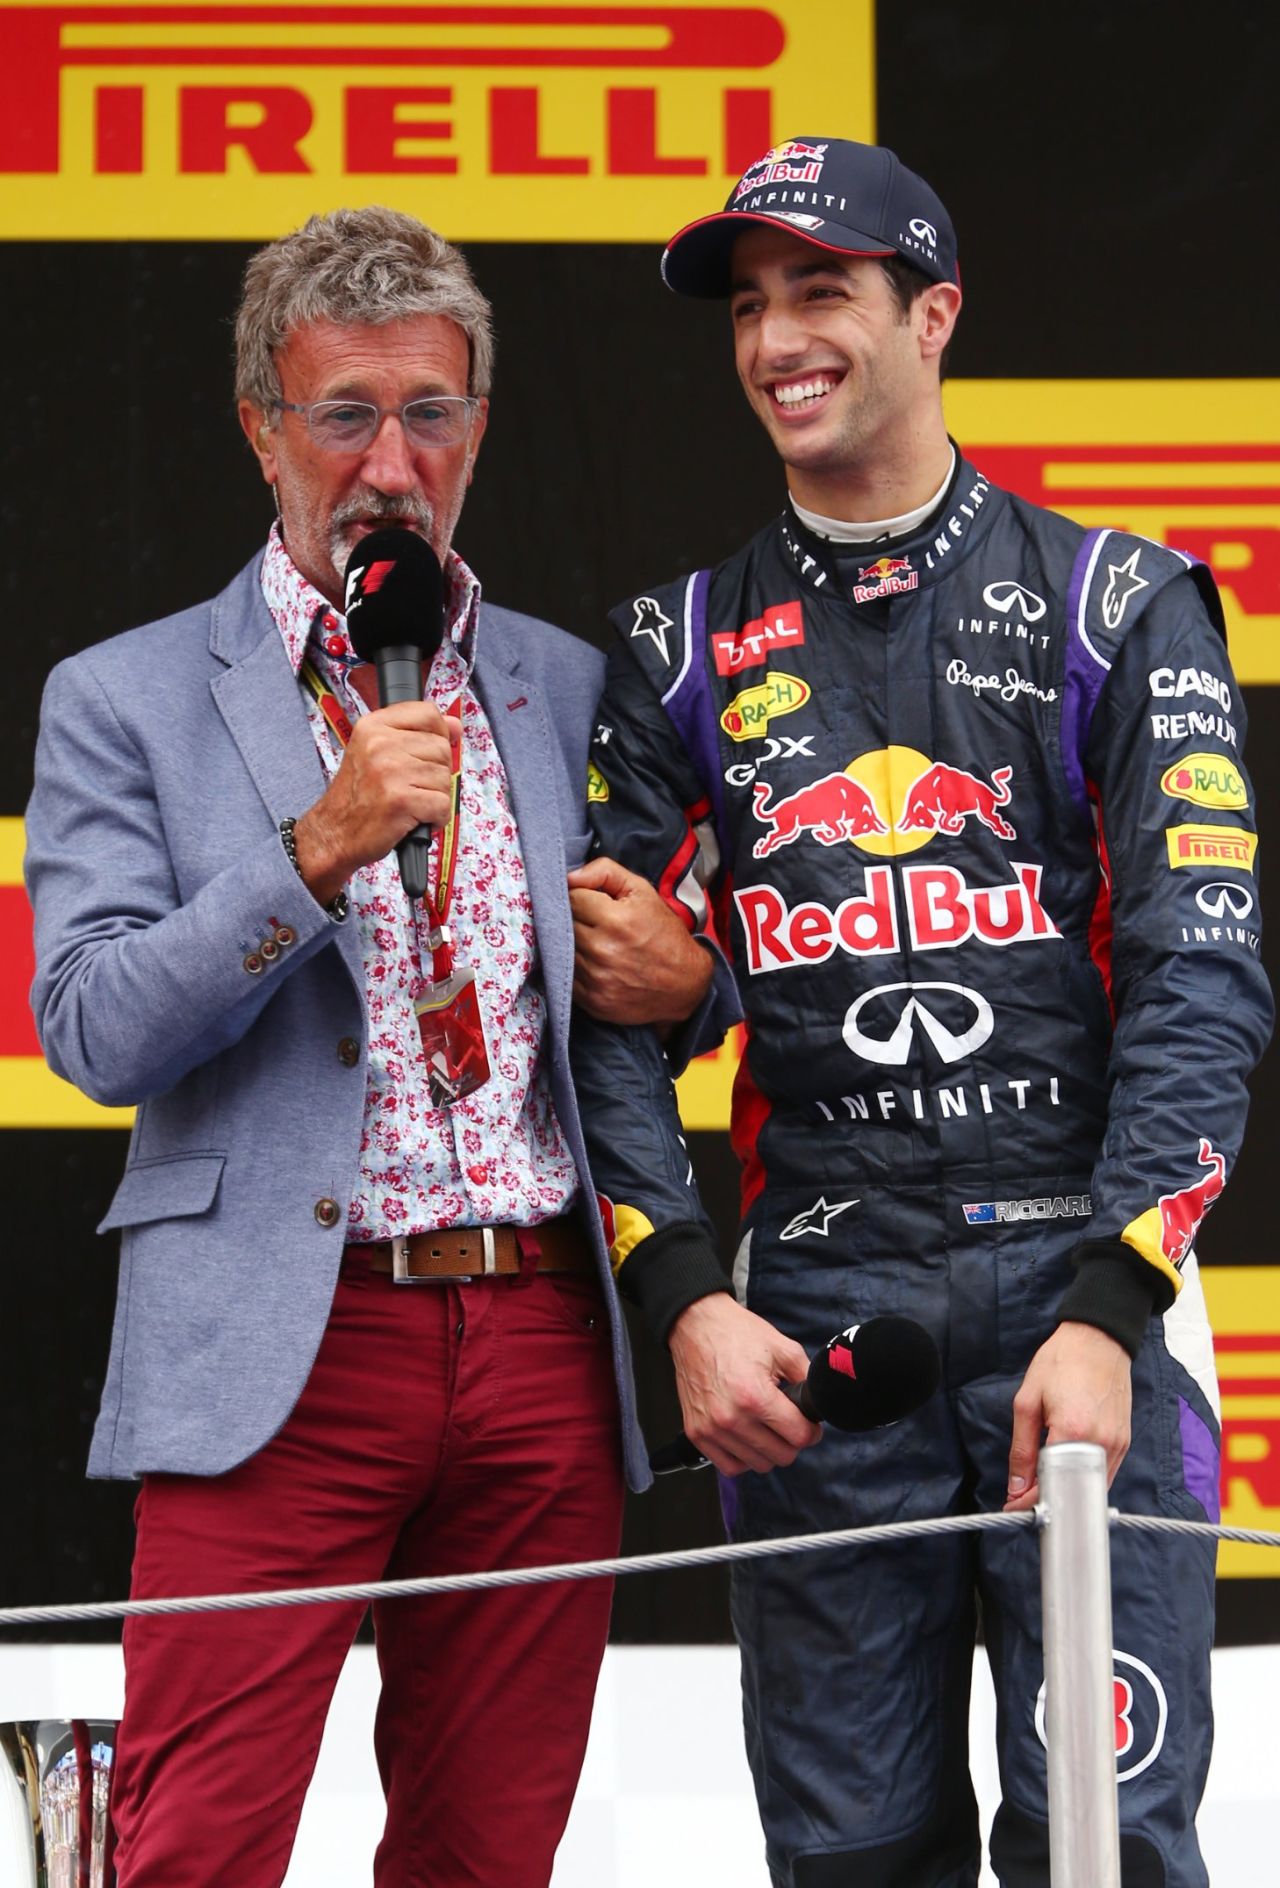 "Tents became caravans and caravans became motor homes and this little area is for the drivers," continued Jordan, seen here pictured with Red Bull driver Daniel Ricciardo. "A lot of the drivers are staying here. It just takes the stress out of it altogether."